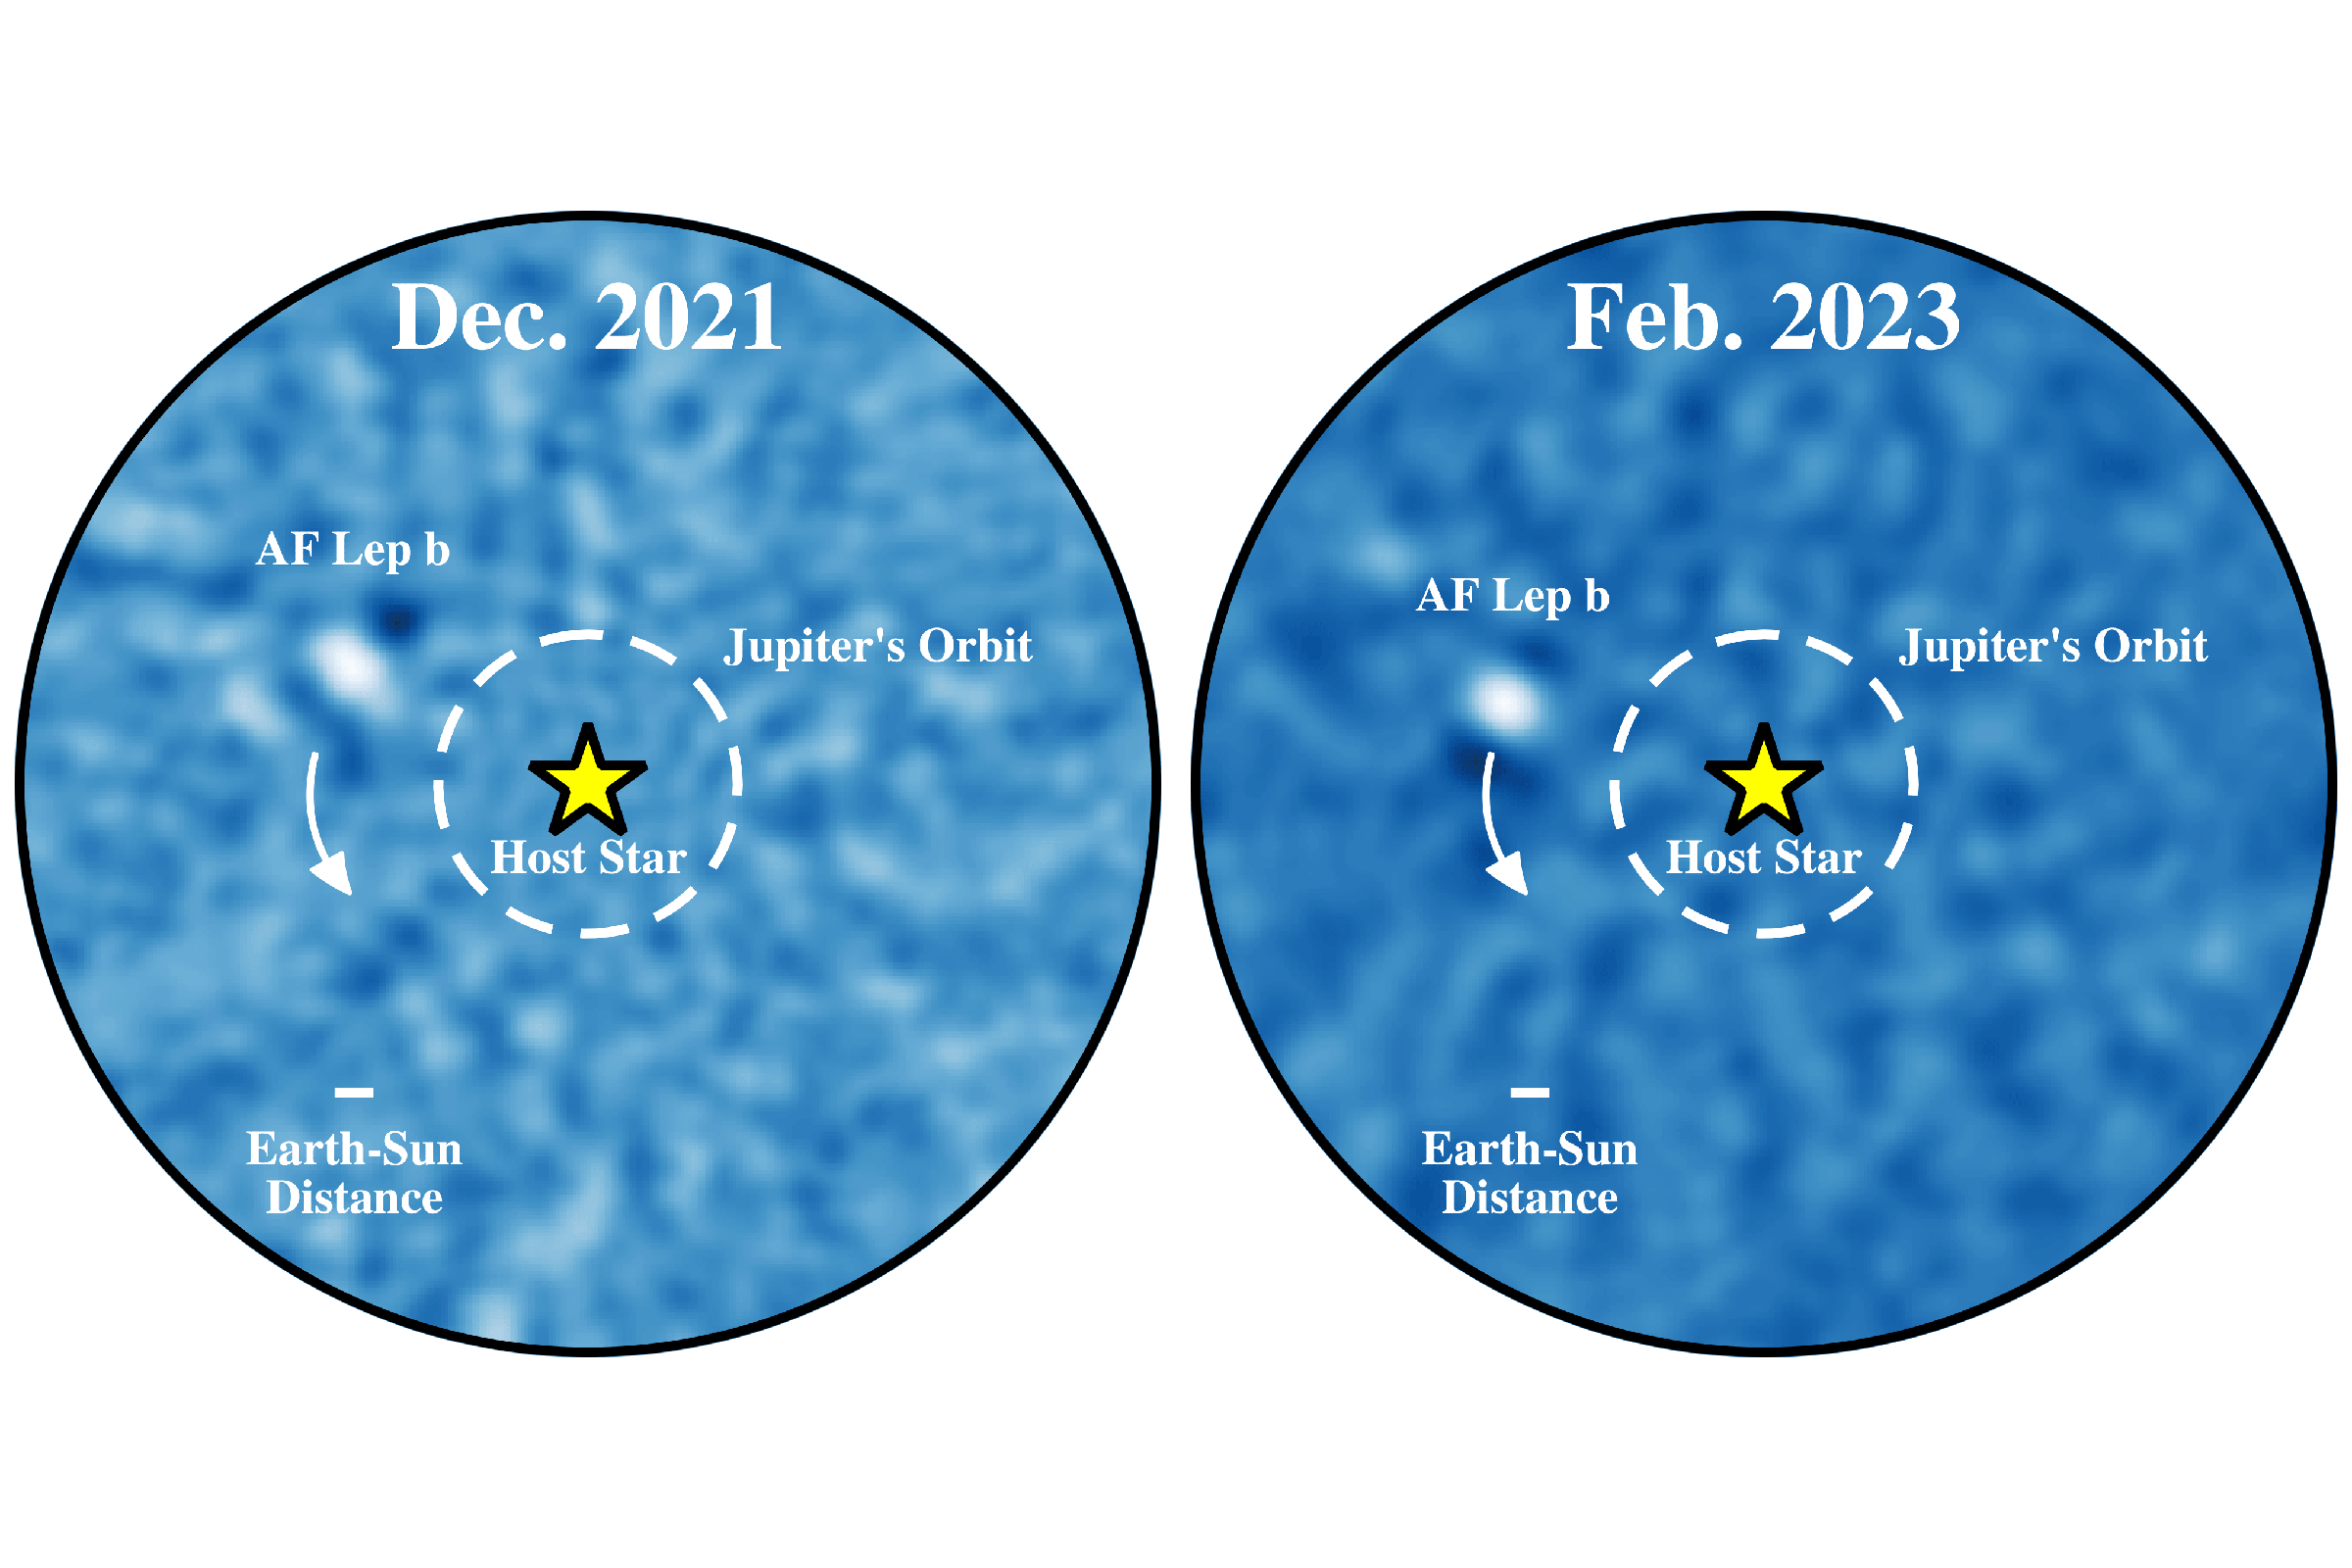 In this side-by-side comparison of two telescope images, a white dot on a blue background changes position as it orbits around a central star symbol